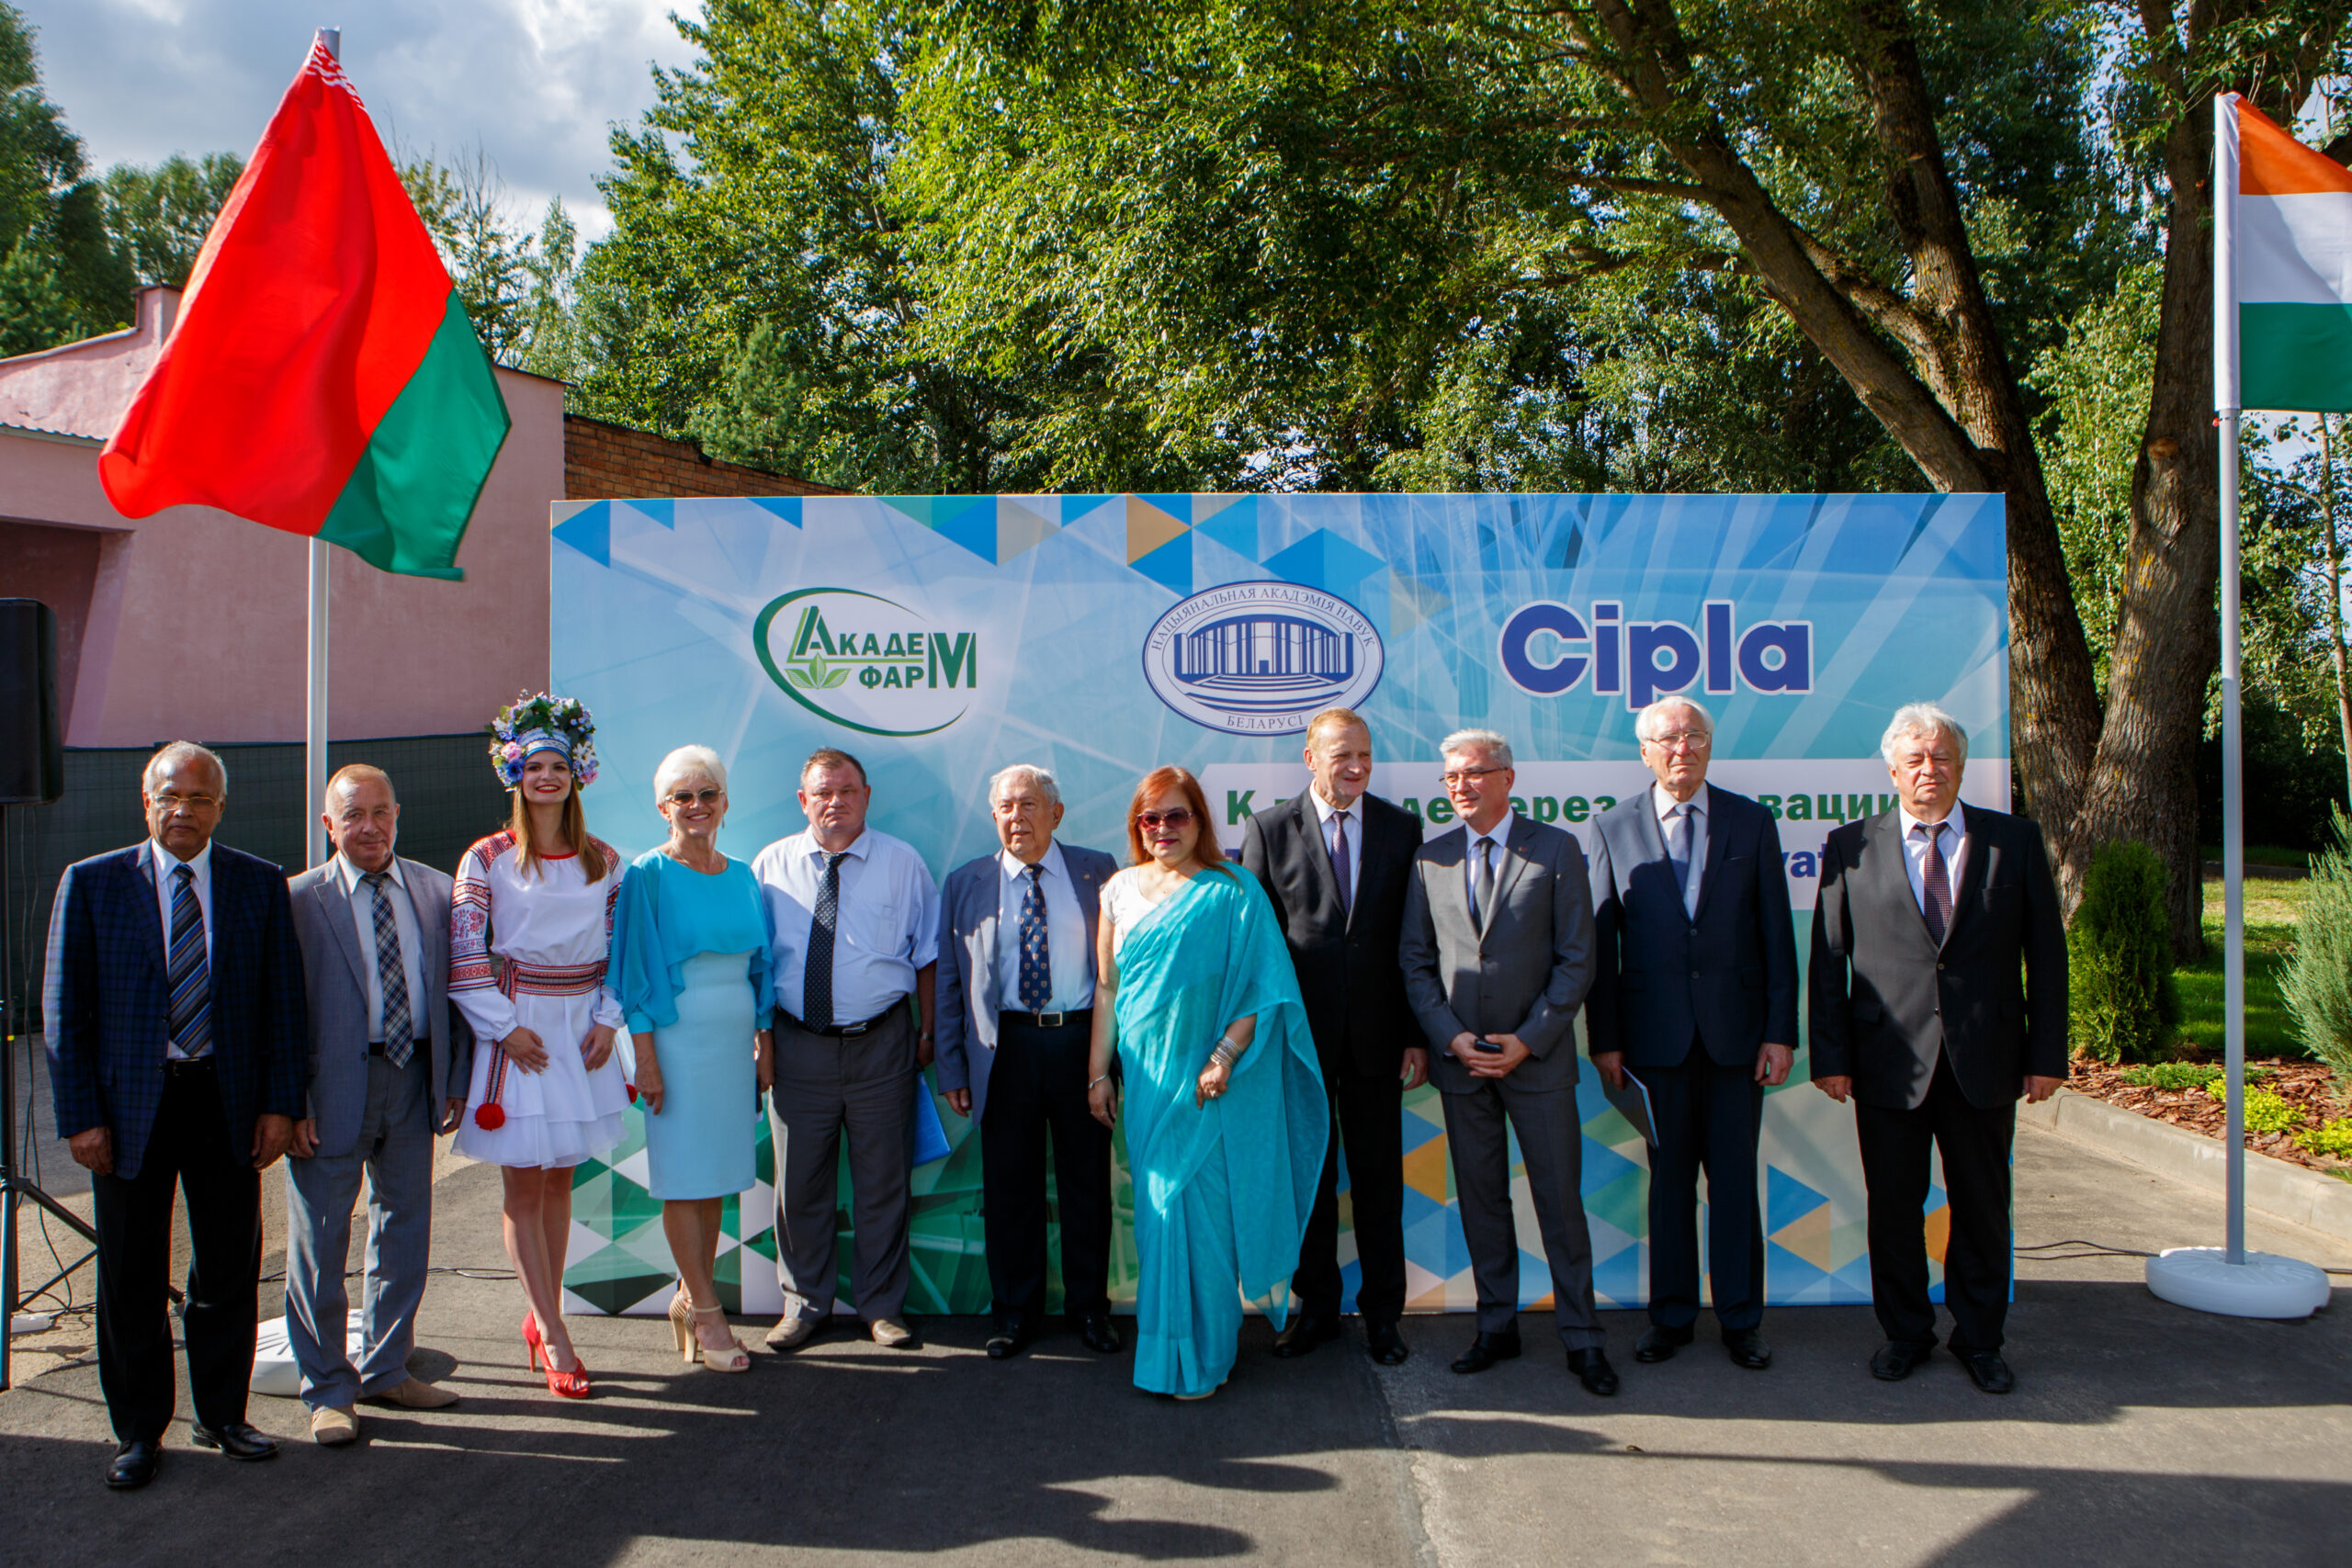 Reception of the delegation of Cipla Limited company photo